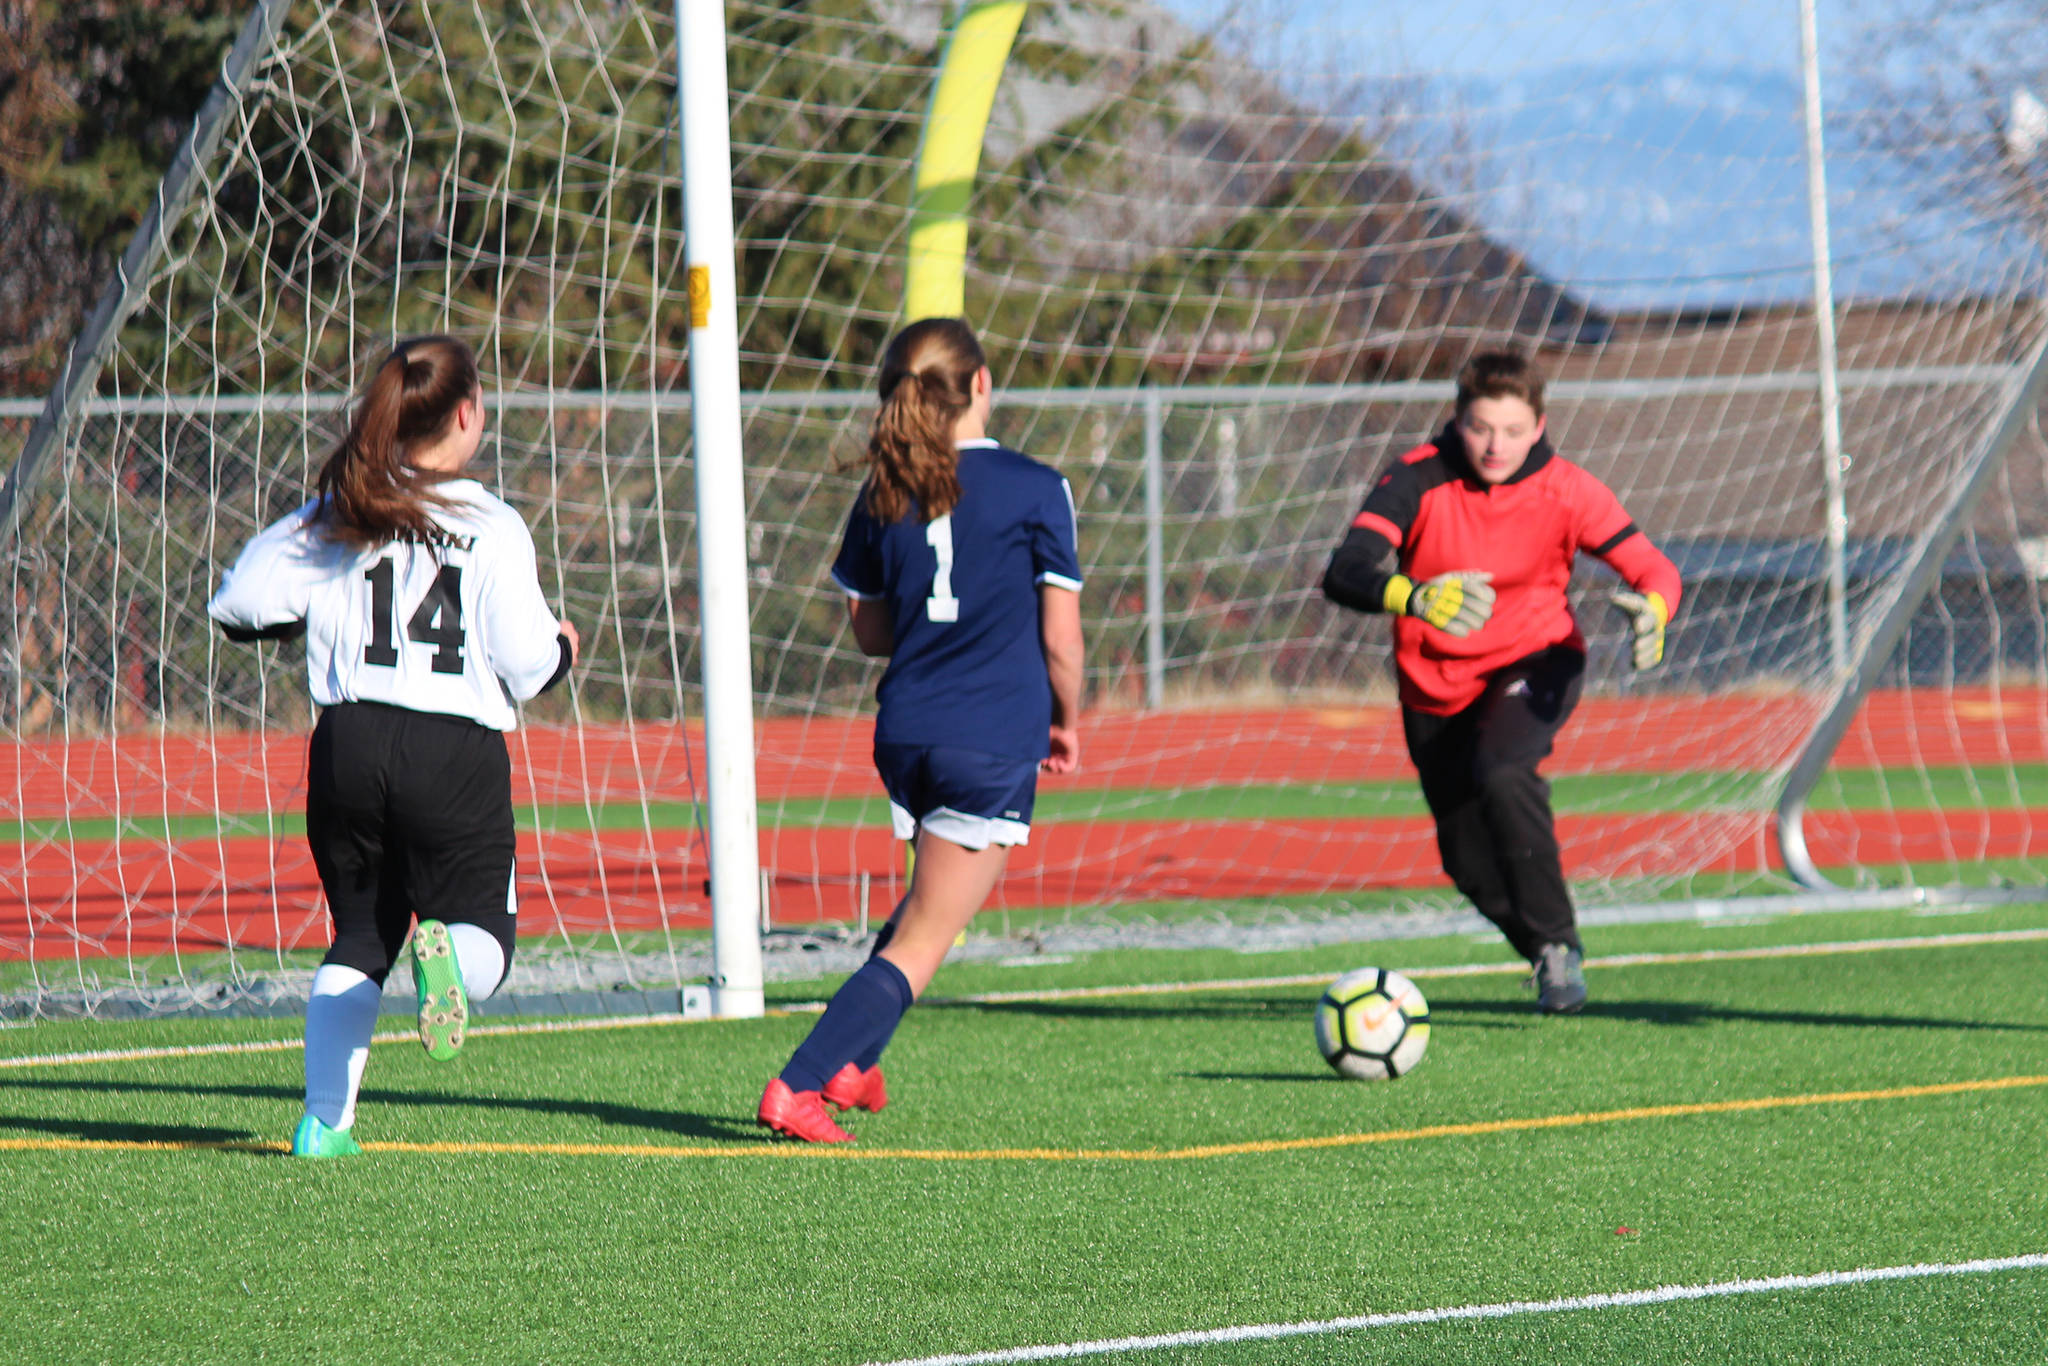 Nikiski’s Abby Bystedt rushes to a ball shot by Homer’s Aiyana Cline (center) during a Tuesday, April 23, 2019 game at Homer High School in Homer, Alaska. (Photo by Megan Pacer/Homer News)